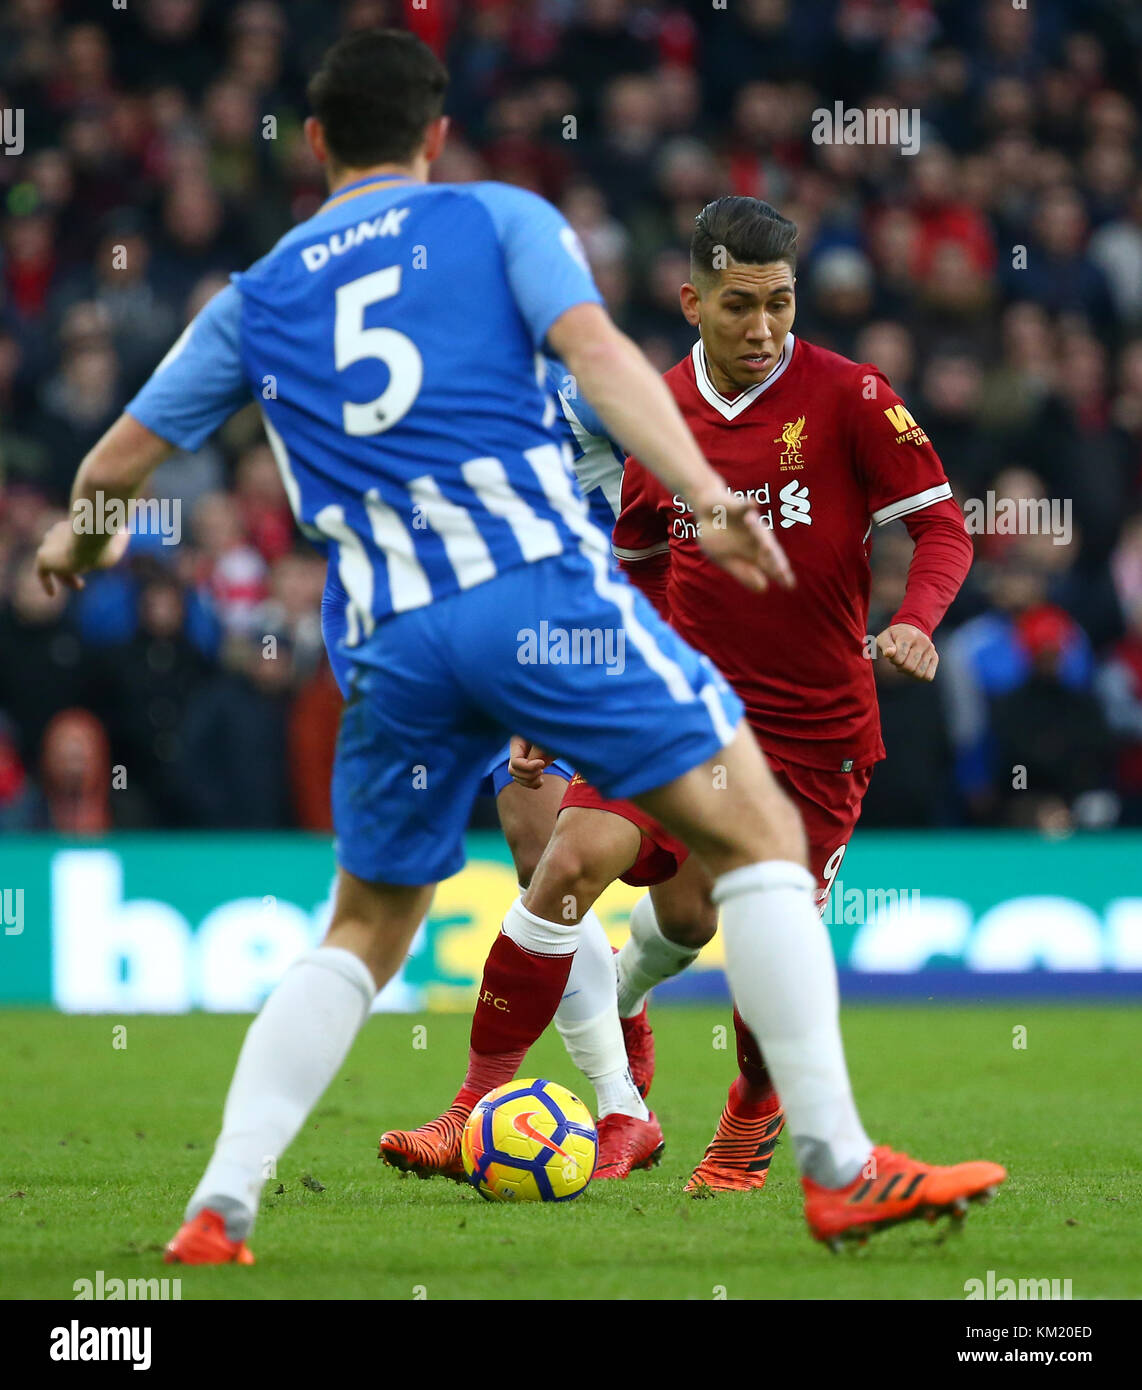 Roberto Firmino of Liverpool takes on Lewis Dunk of Brighton during the Premier League match between Brighton and Hove Albion and Liverpool at the American Express Community Stadium in Brighton and Hove. 02 Dec 2017 *** EDITORIAL USE ONLY *** FA Premier League and Football League images are subject to DataCo Licence see www.football-dataco.com Stock Photo